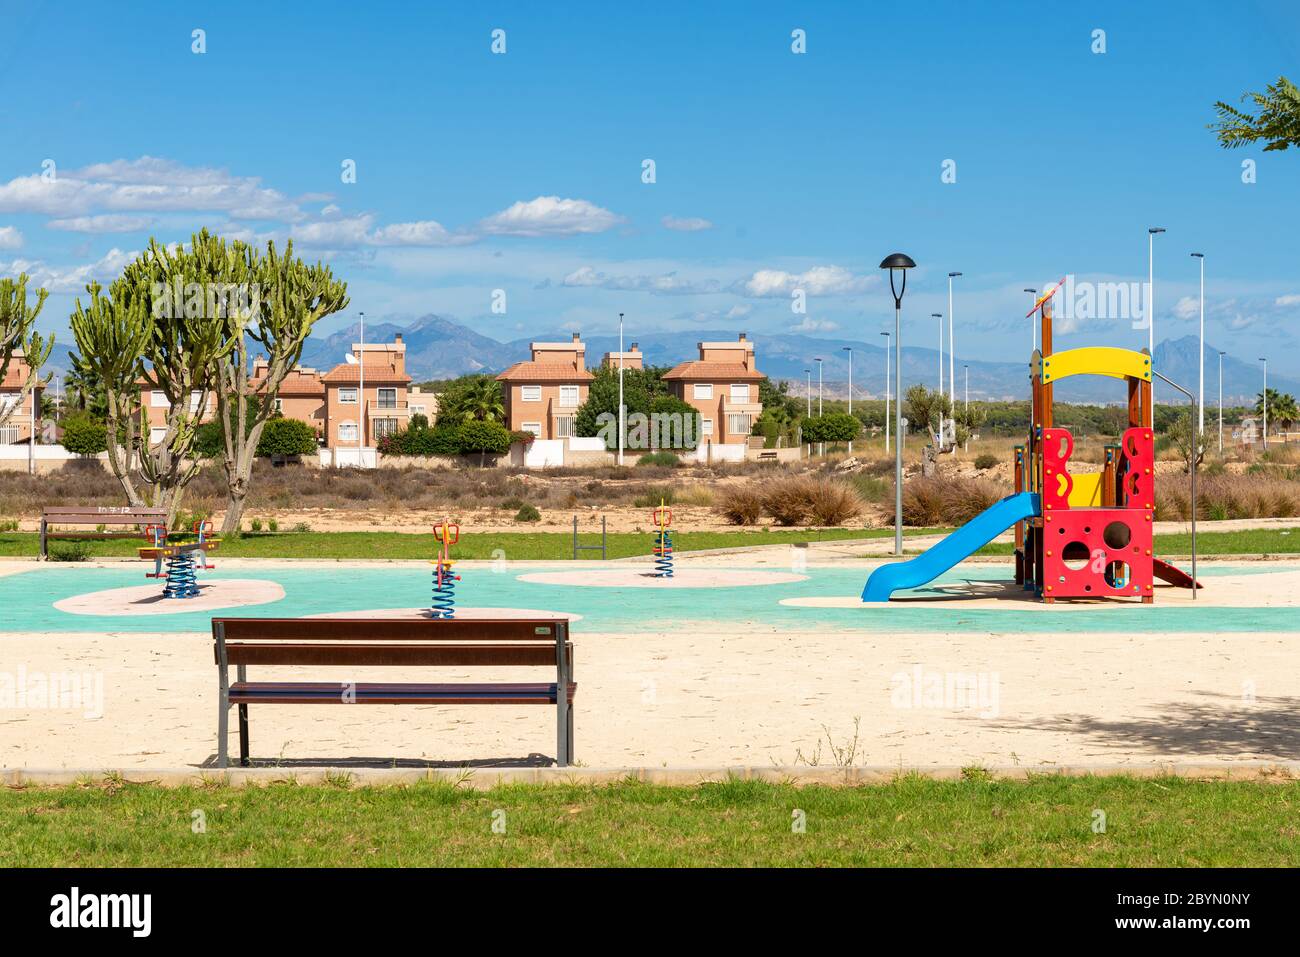 Children's playground beside new property development in town of Gran Alacant close to Alicante, Costa Blanca, Spain Stock Photo